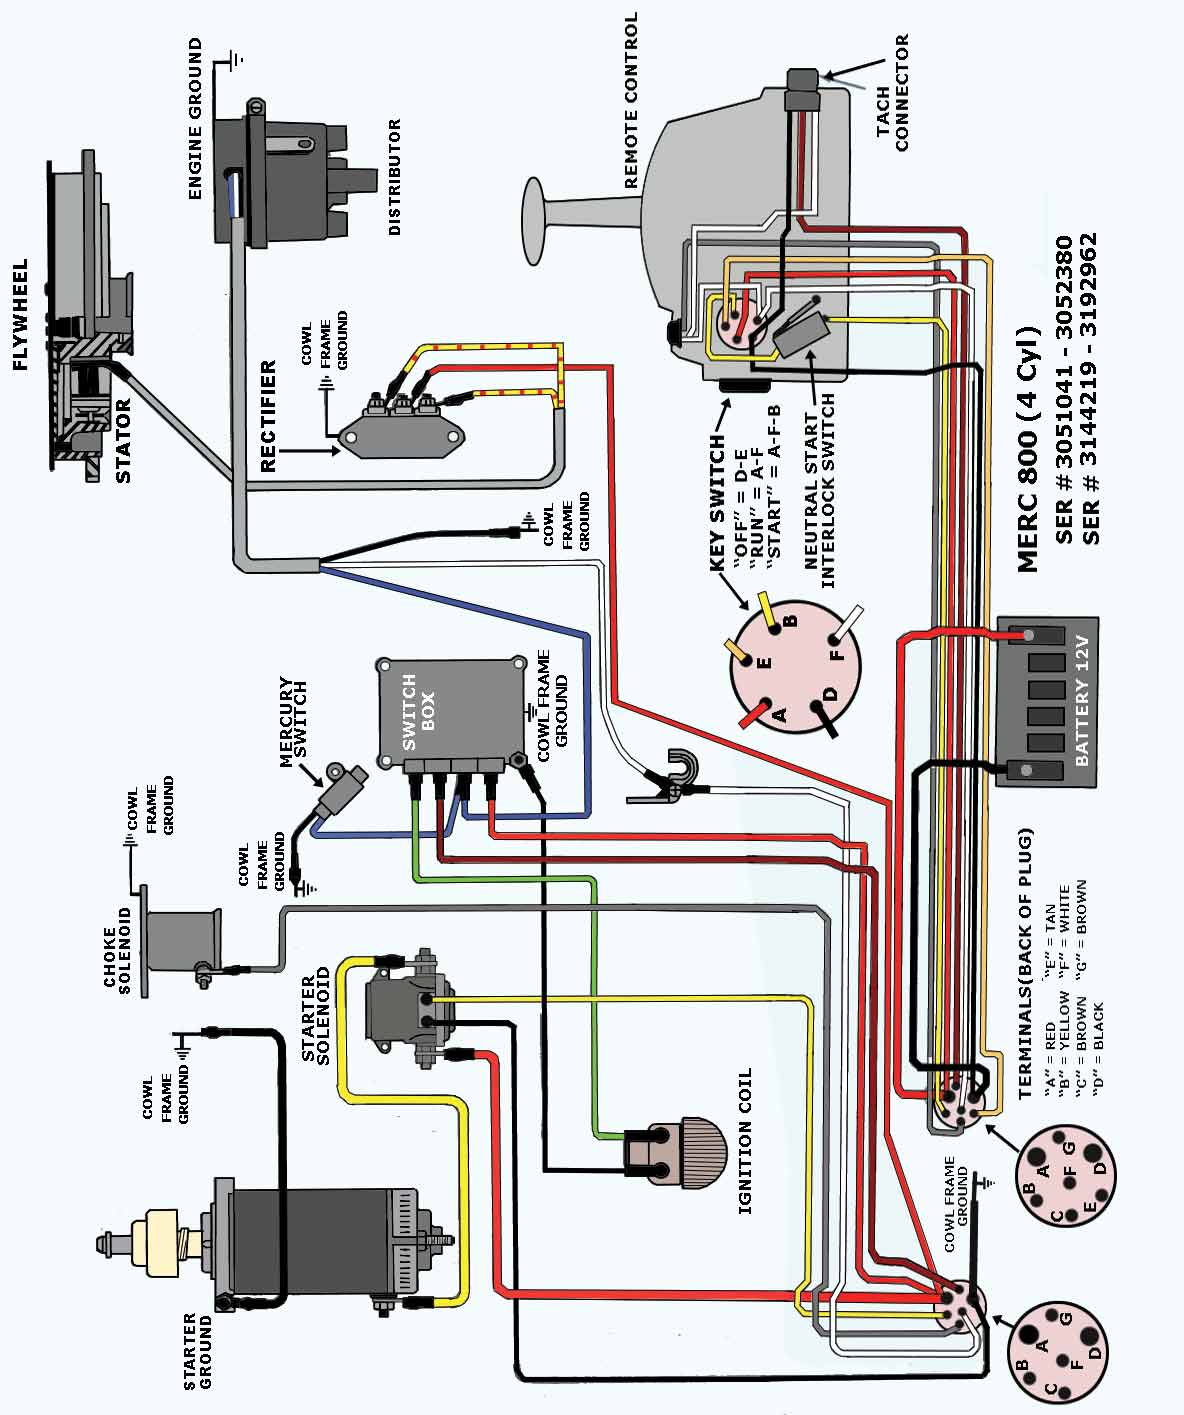 wiring diagram for 50 hp mercury outboard